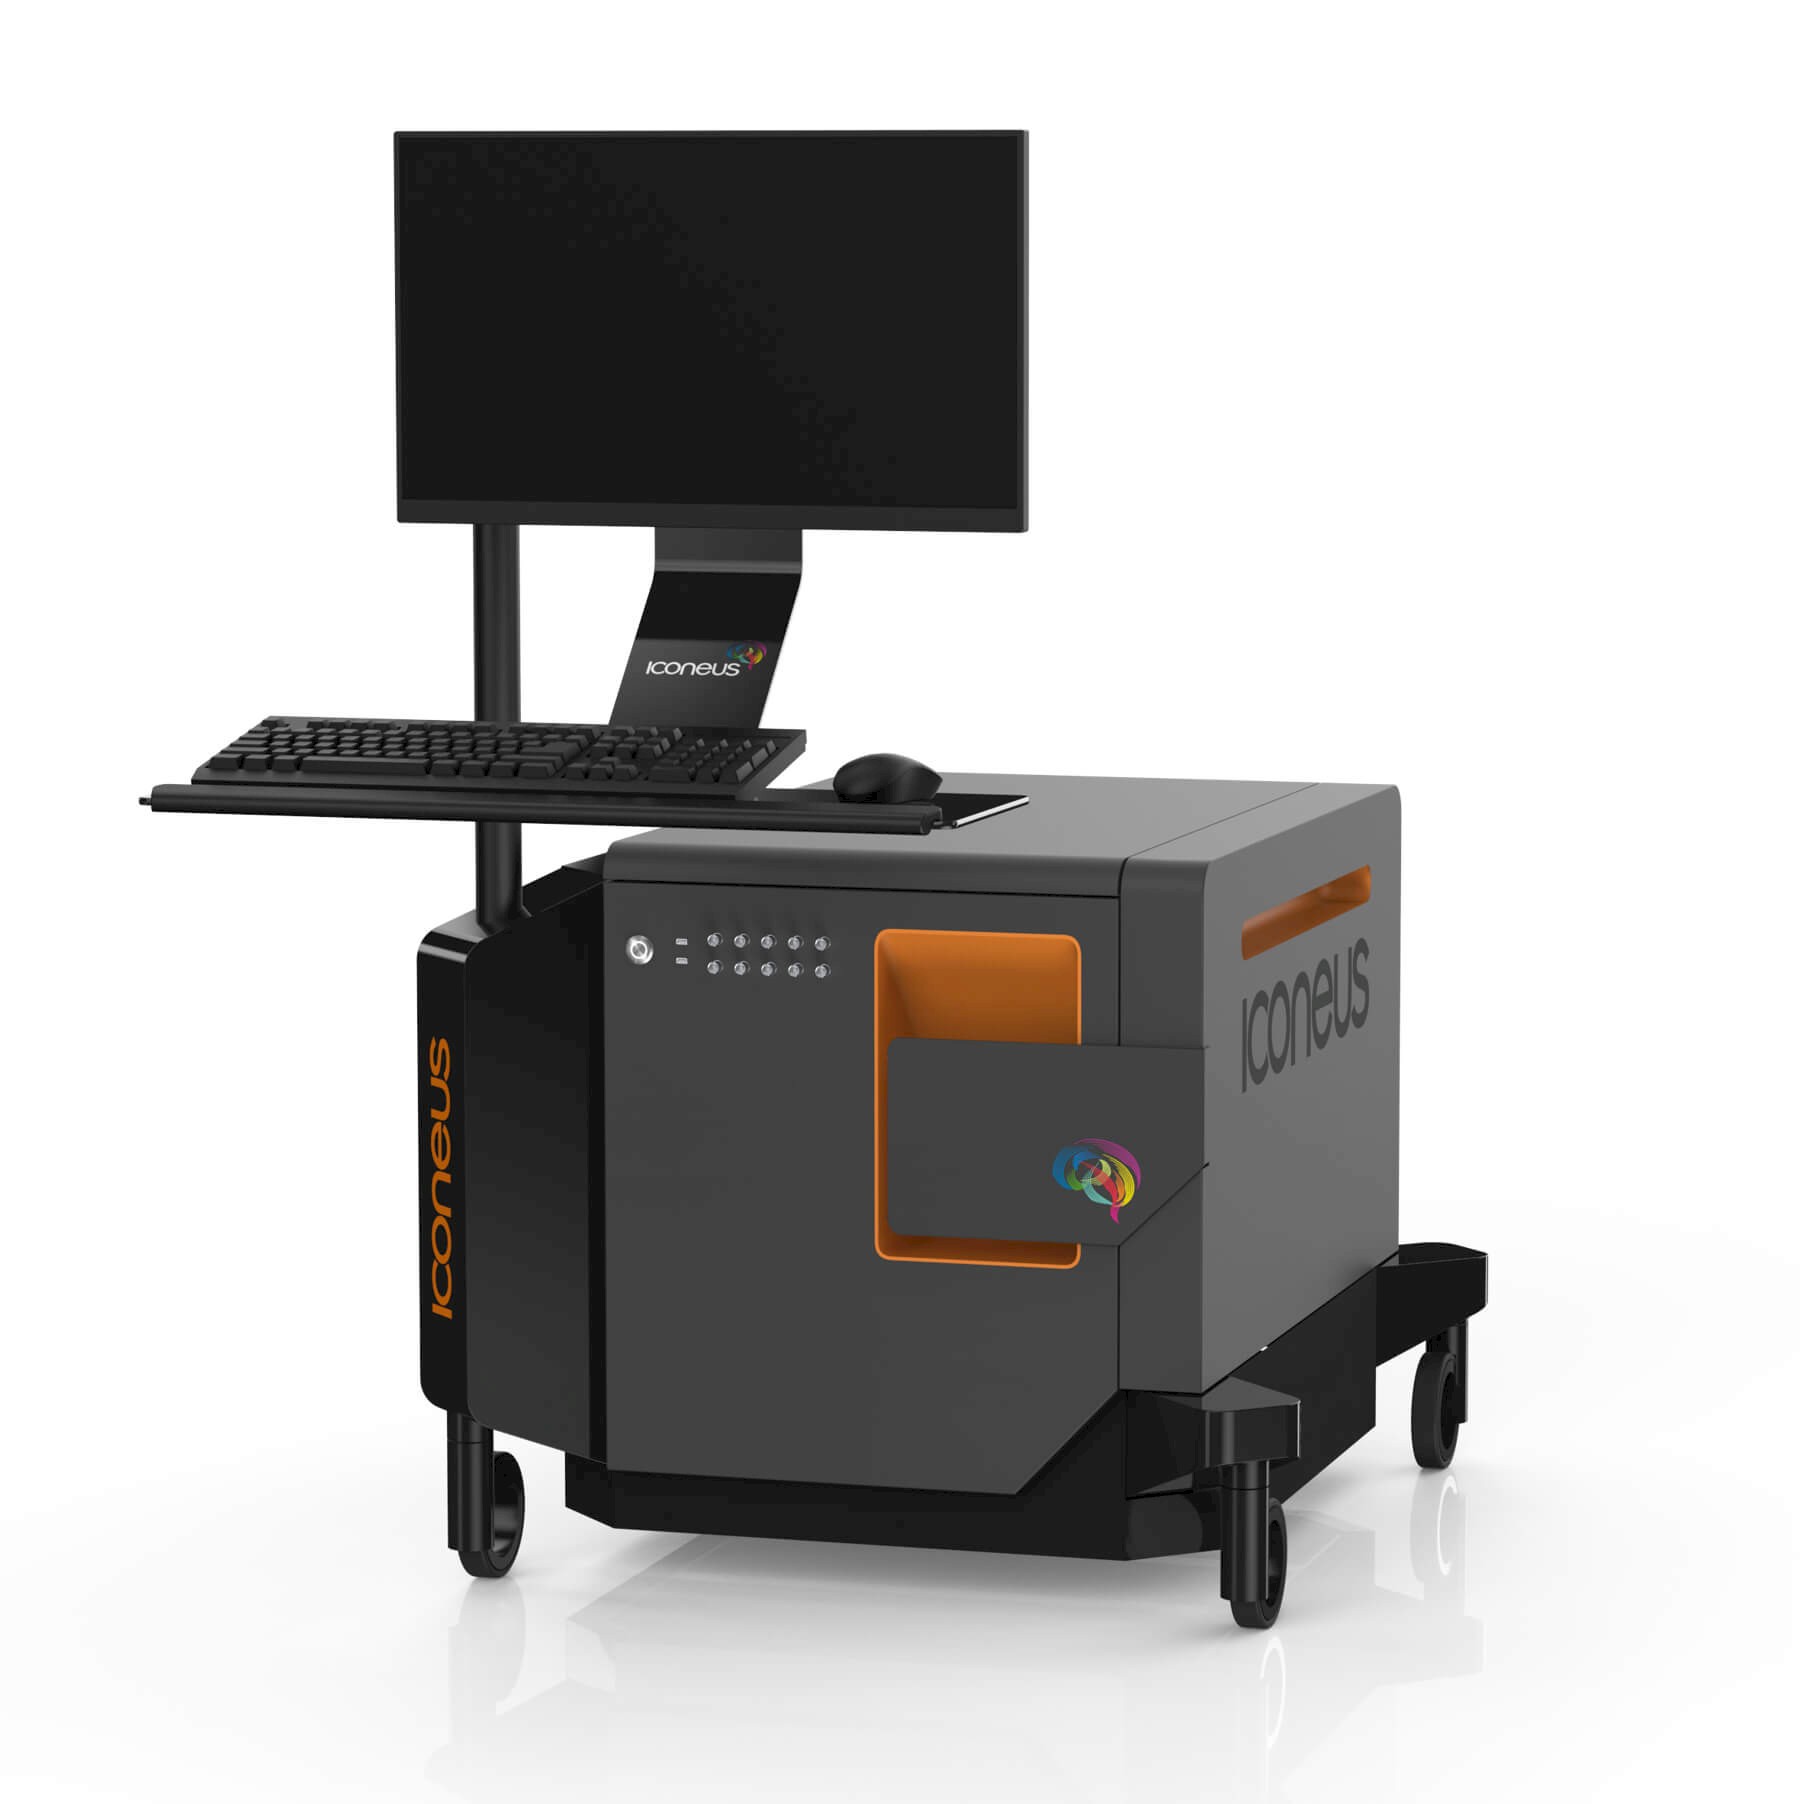 Iconeus One: Plug-and-play functional ultrasound imaging​